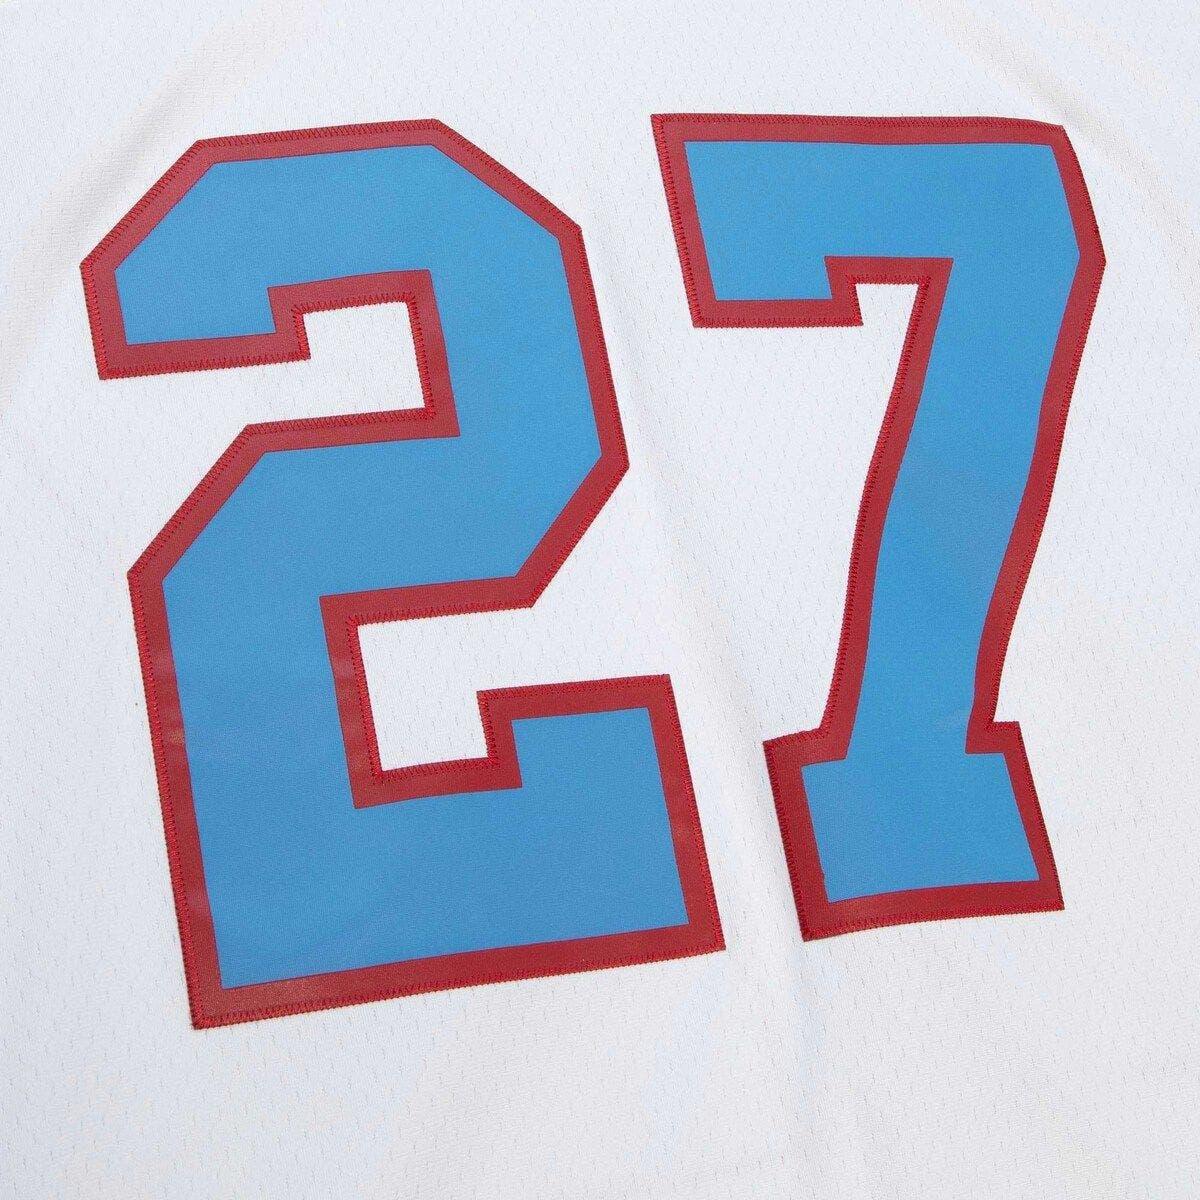 Warren Moon Mitchell & Ness Throwback Legacy Jersey - Official Tennessee  Titans Store